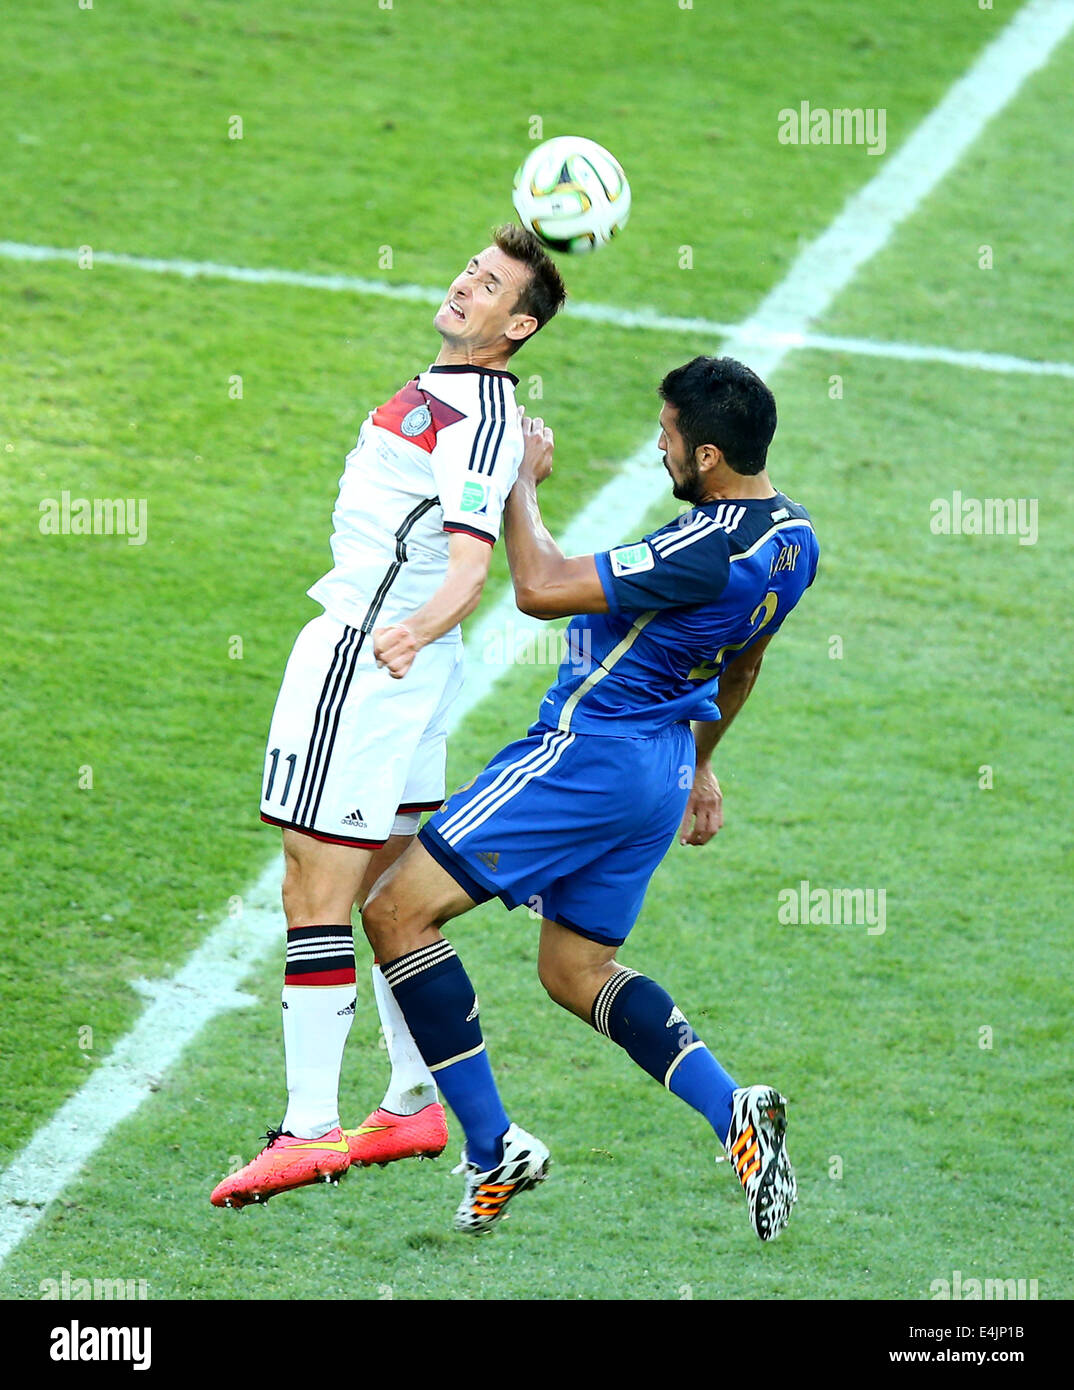 Rio De Janeiro, Brazil. 13th July, 2014. Germany's Miroslav Klose competes for a header with Argentina's Ezequiel Garay during the final match between Germany and Argentina of 2014 FIFA World Cup at the Estadio do Maracana Stadium in Rio de Janeiro, Brazil, on July 13, 2014. Credit:  Chen Jianli/Xinhua/Alamy Live News Stock Photo